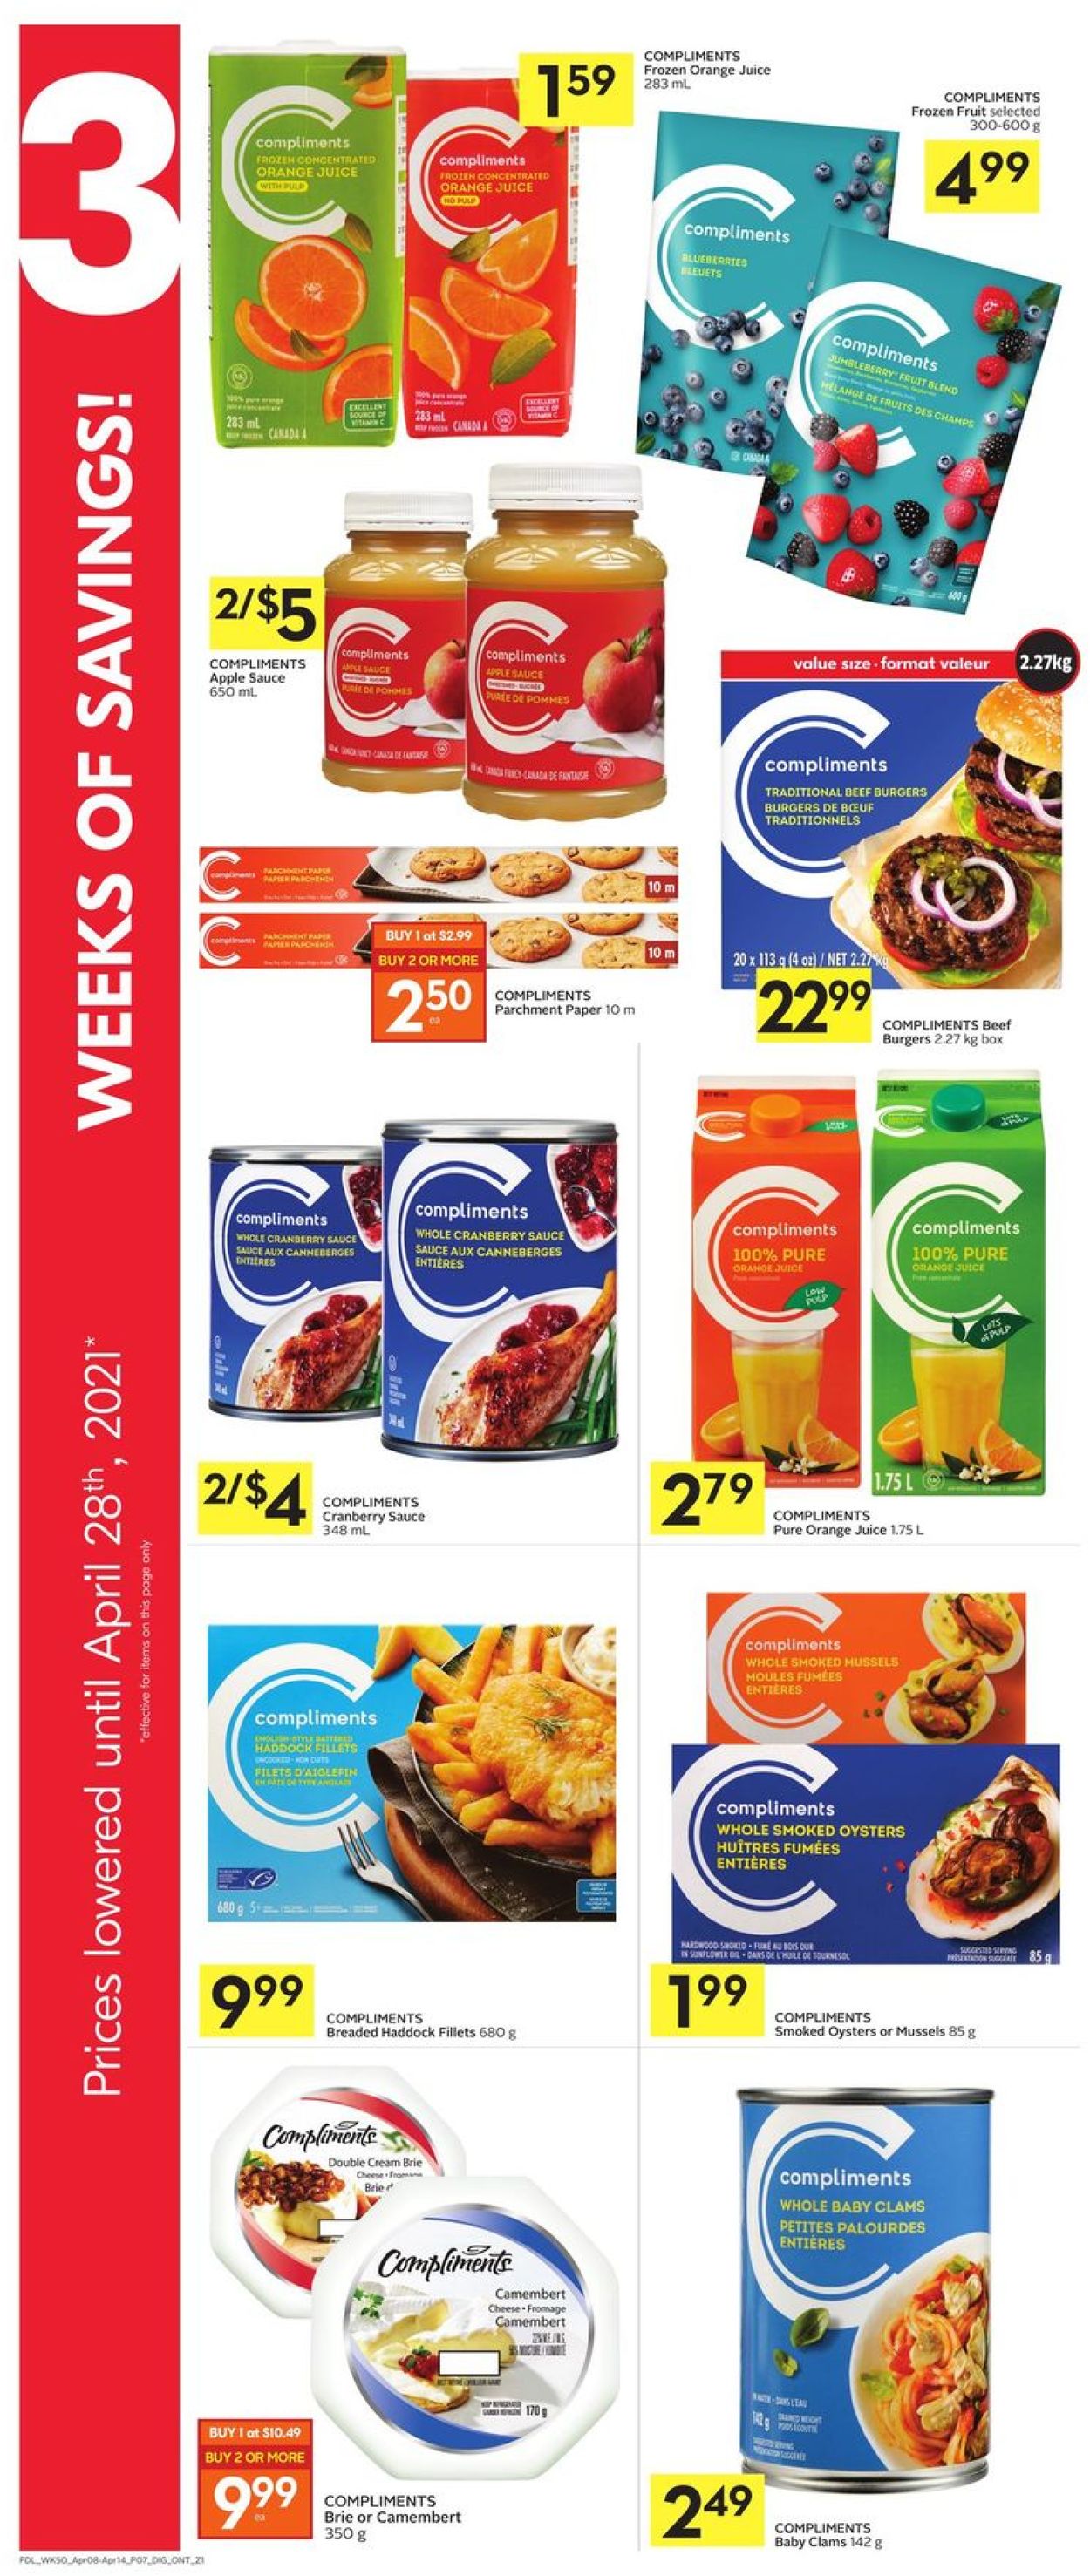 Foodland Flyer from 04/08/2021